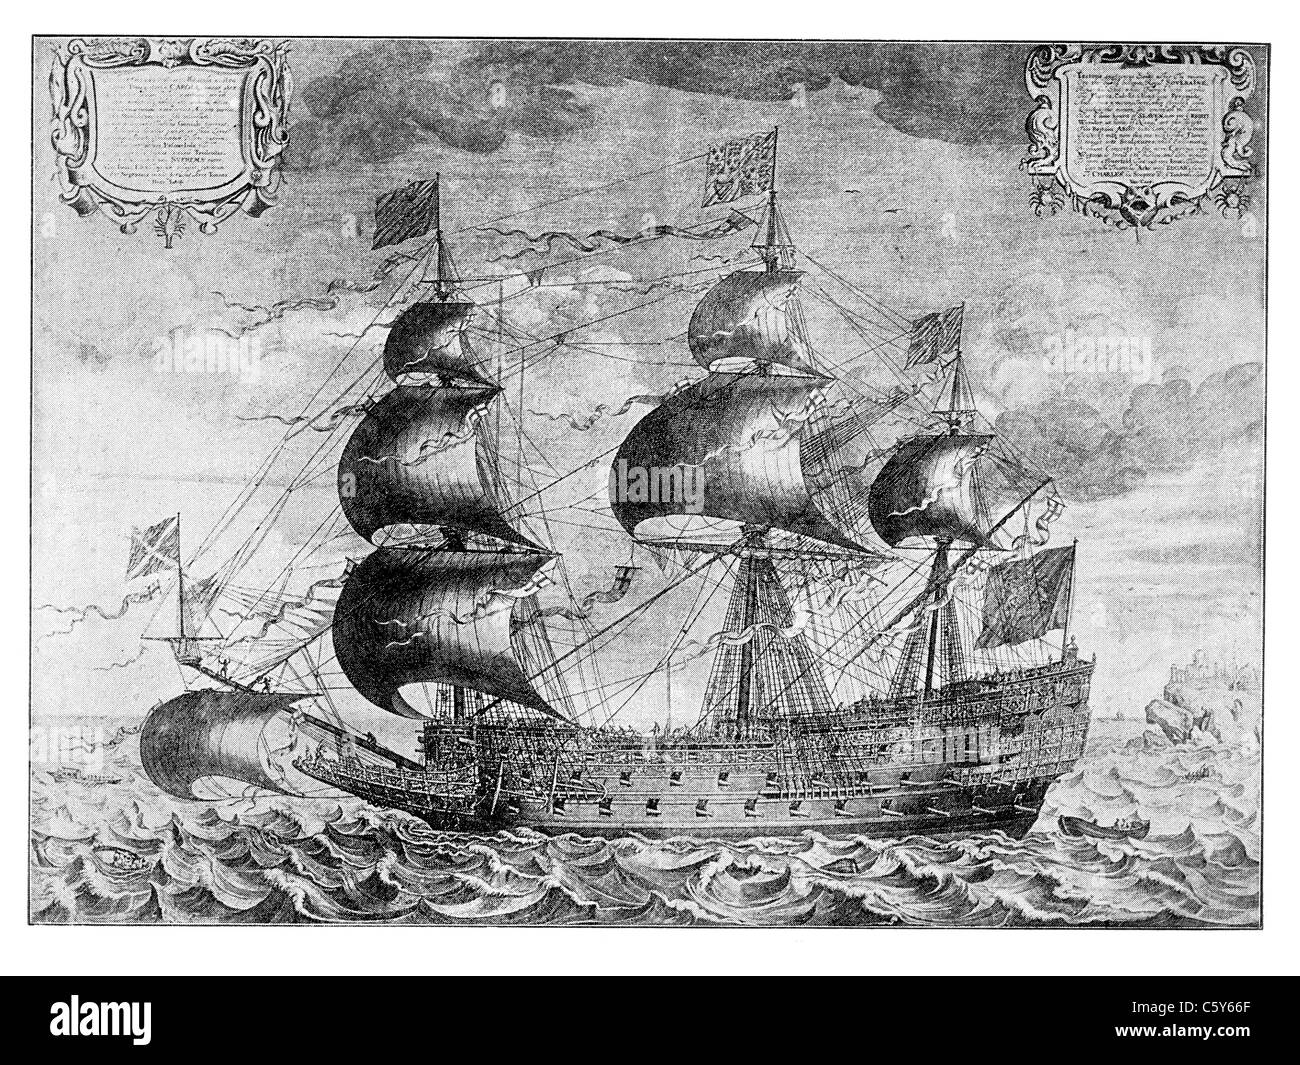 The Sovereign of the Seas, Built for the Royal Navy in 1637; Black and White Illustration; Stock Photo